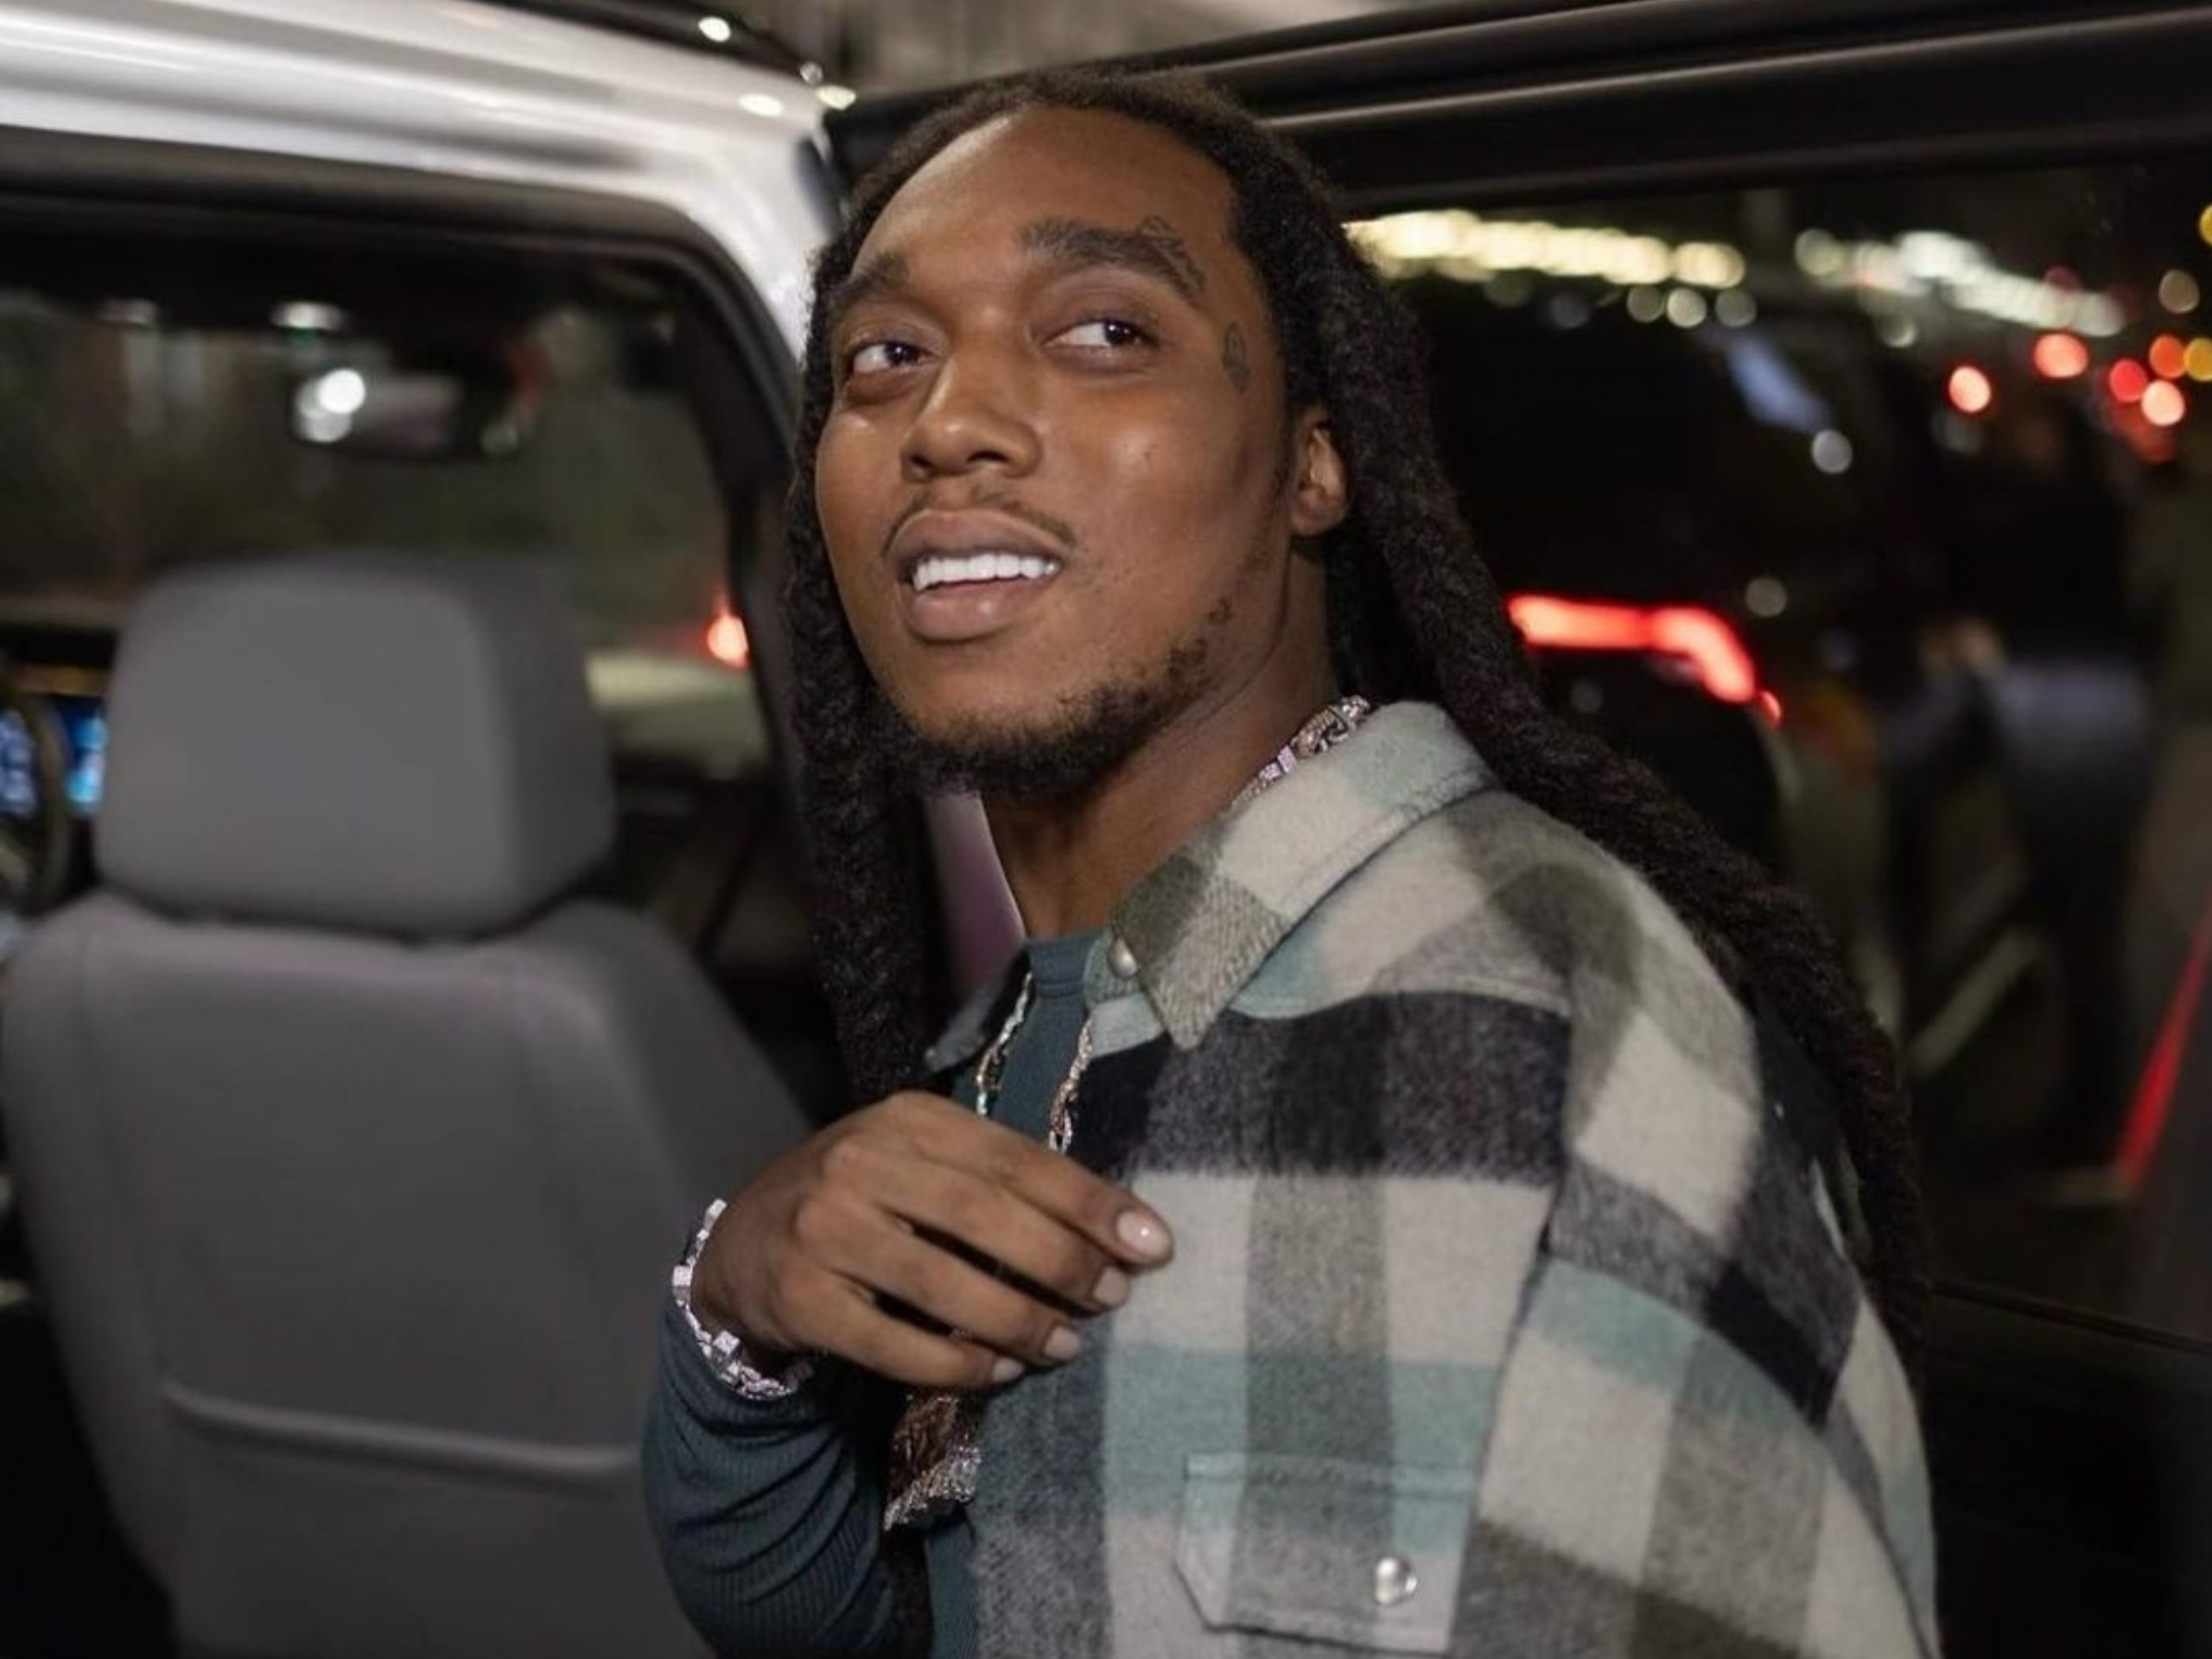 Migos Rapper Takeoff Shot and Killed in Houston